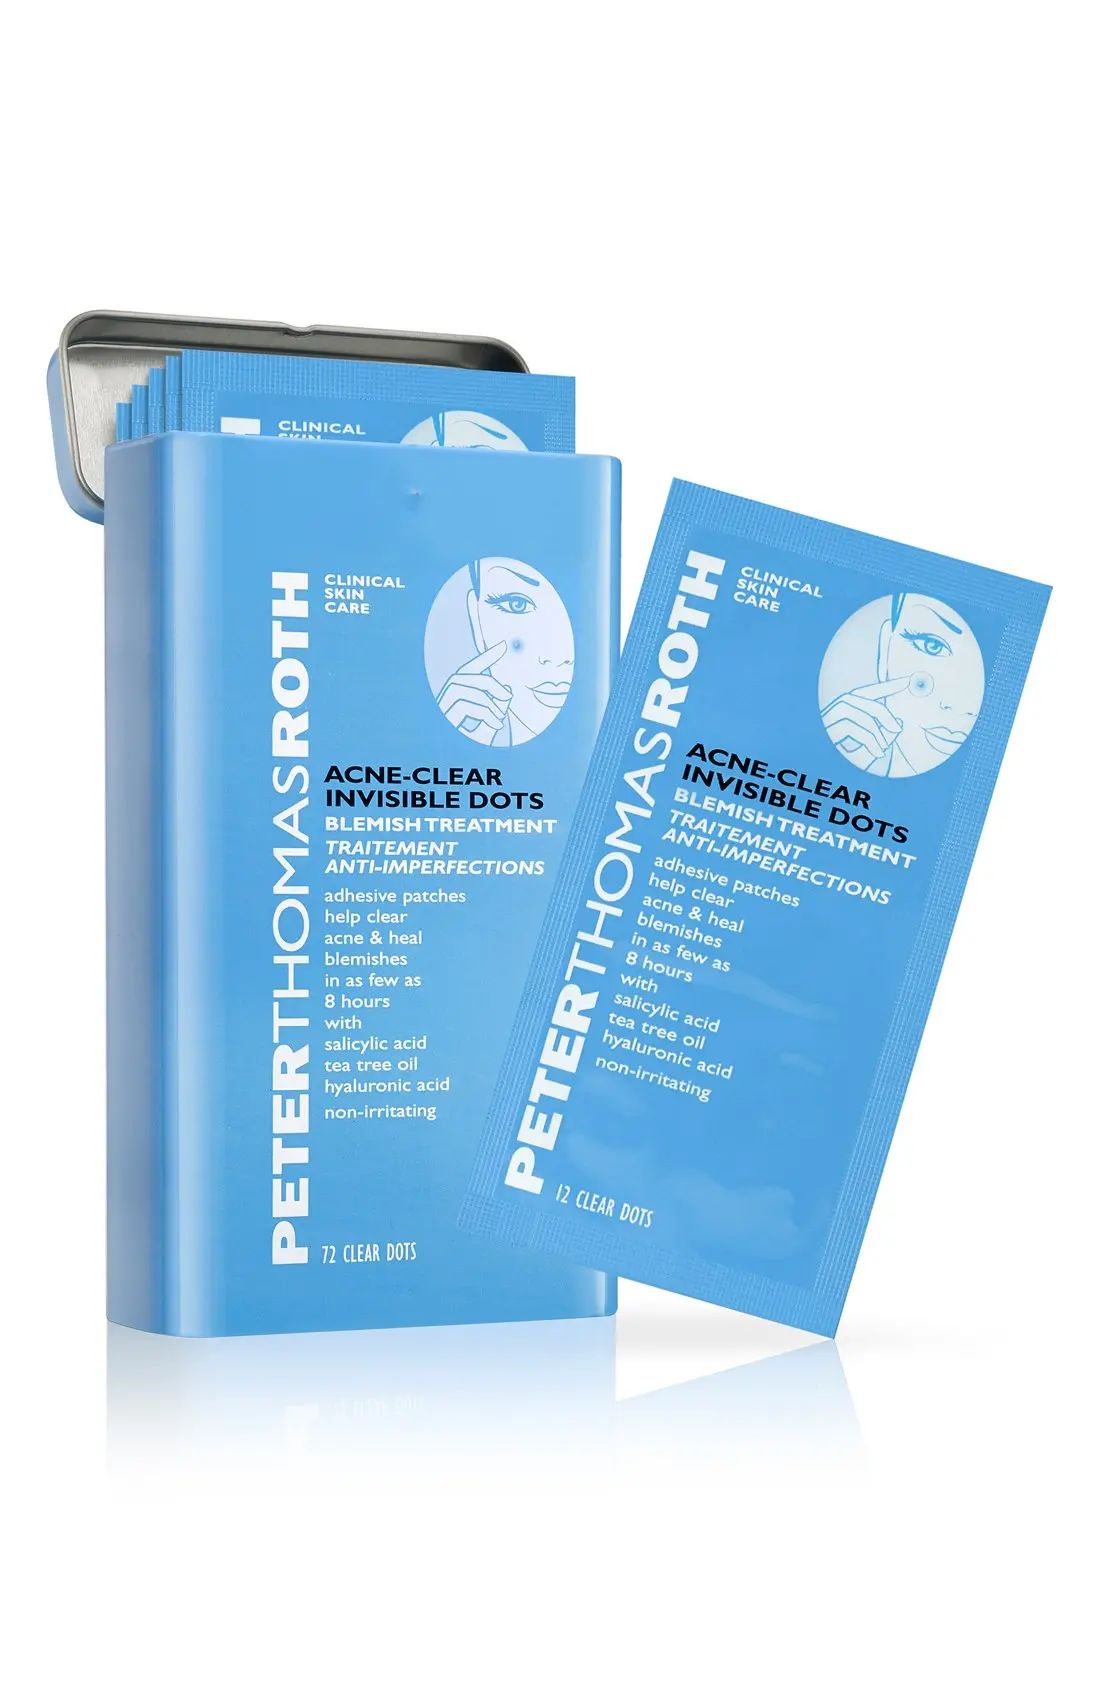 Peter Thomas Roth Acne-Clear Invisible Dots Blemish Treatment at Nordstrom | Nordstrom